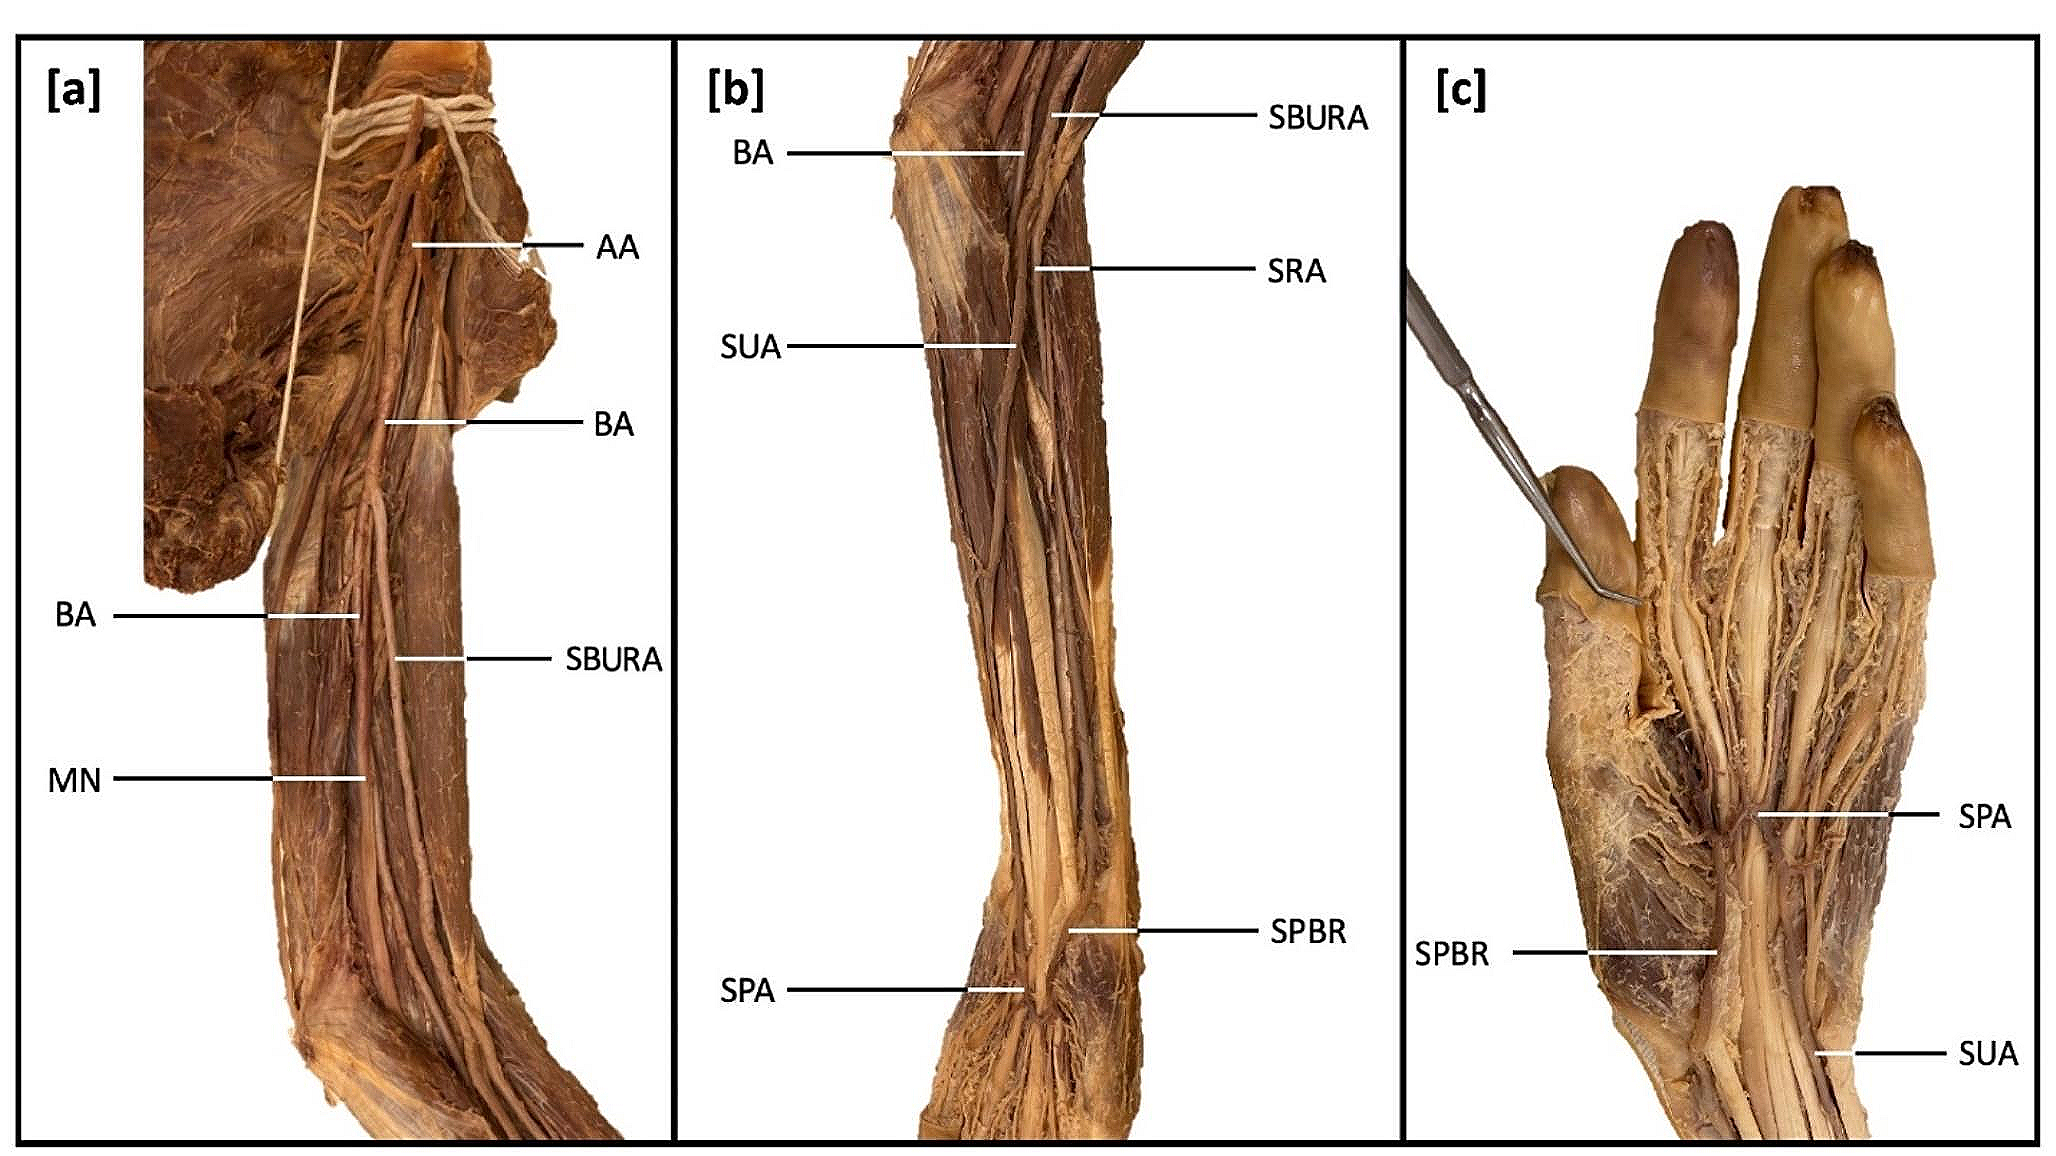 Unilateral identification of a rare superficial brachioulnoradial artery contributing to the superficial palmar arch and brachial artery continuing as the interosseous artery: a case report